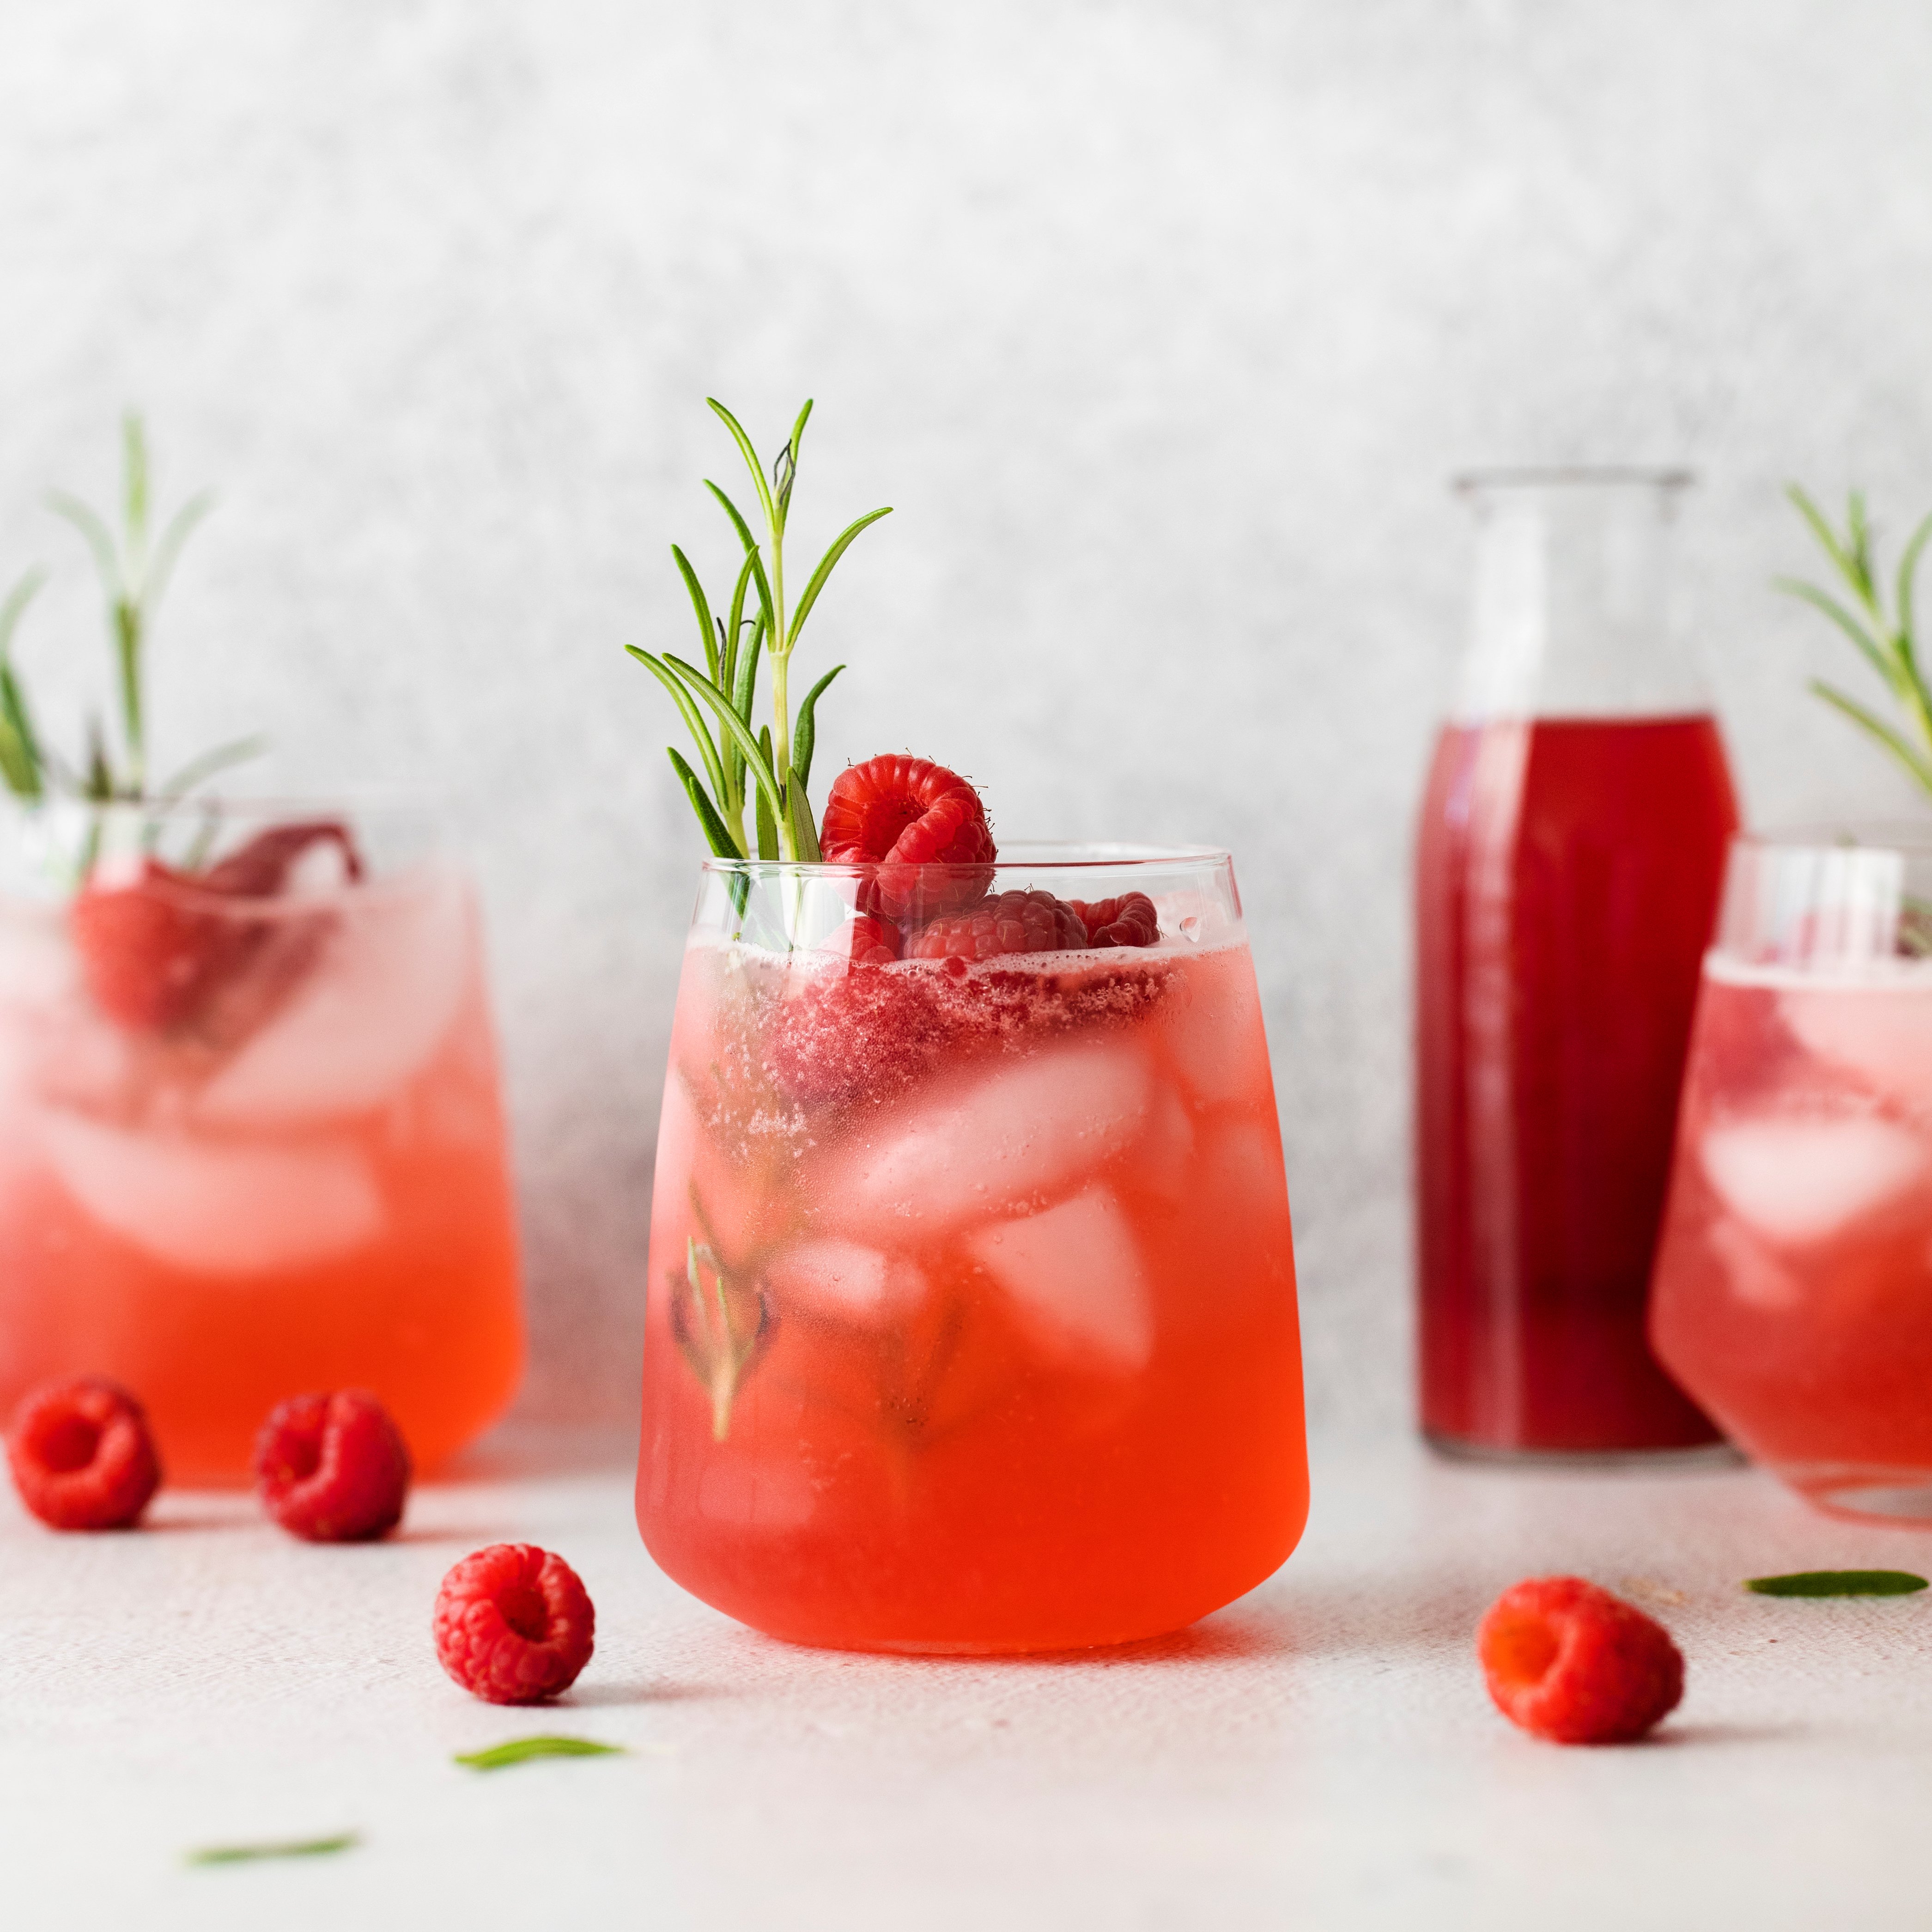 This Raspberry Gin Cocktail is the perfect sweet and fruity drink for Valentine’s day. This refreshing cocktail is made with two types of liquor, fresh lemon, and a refined sugar-free raspberry simple syrup!